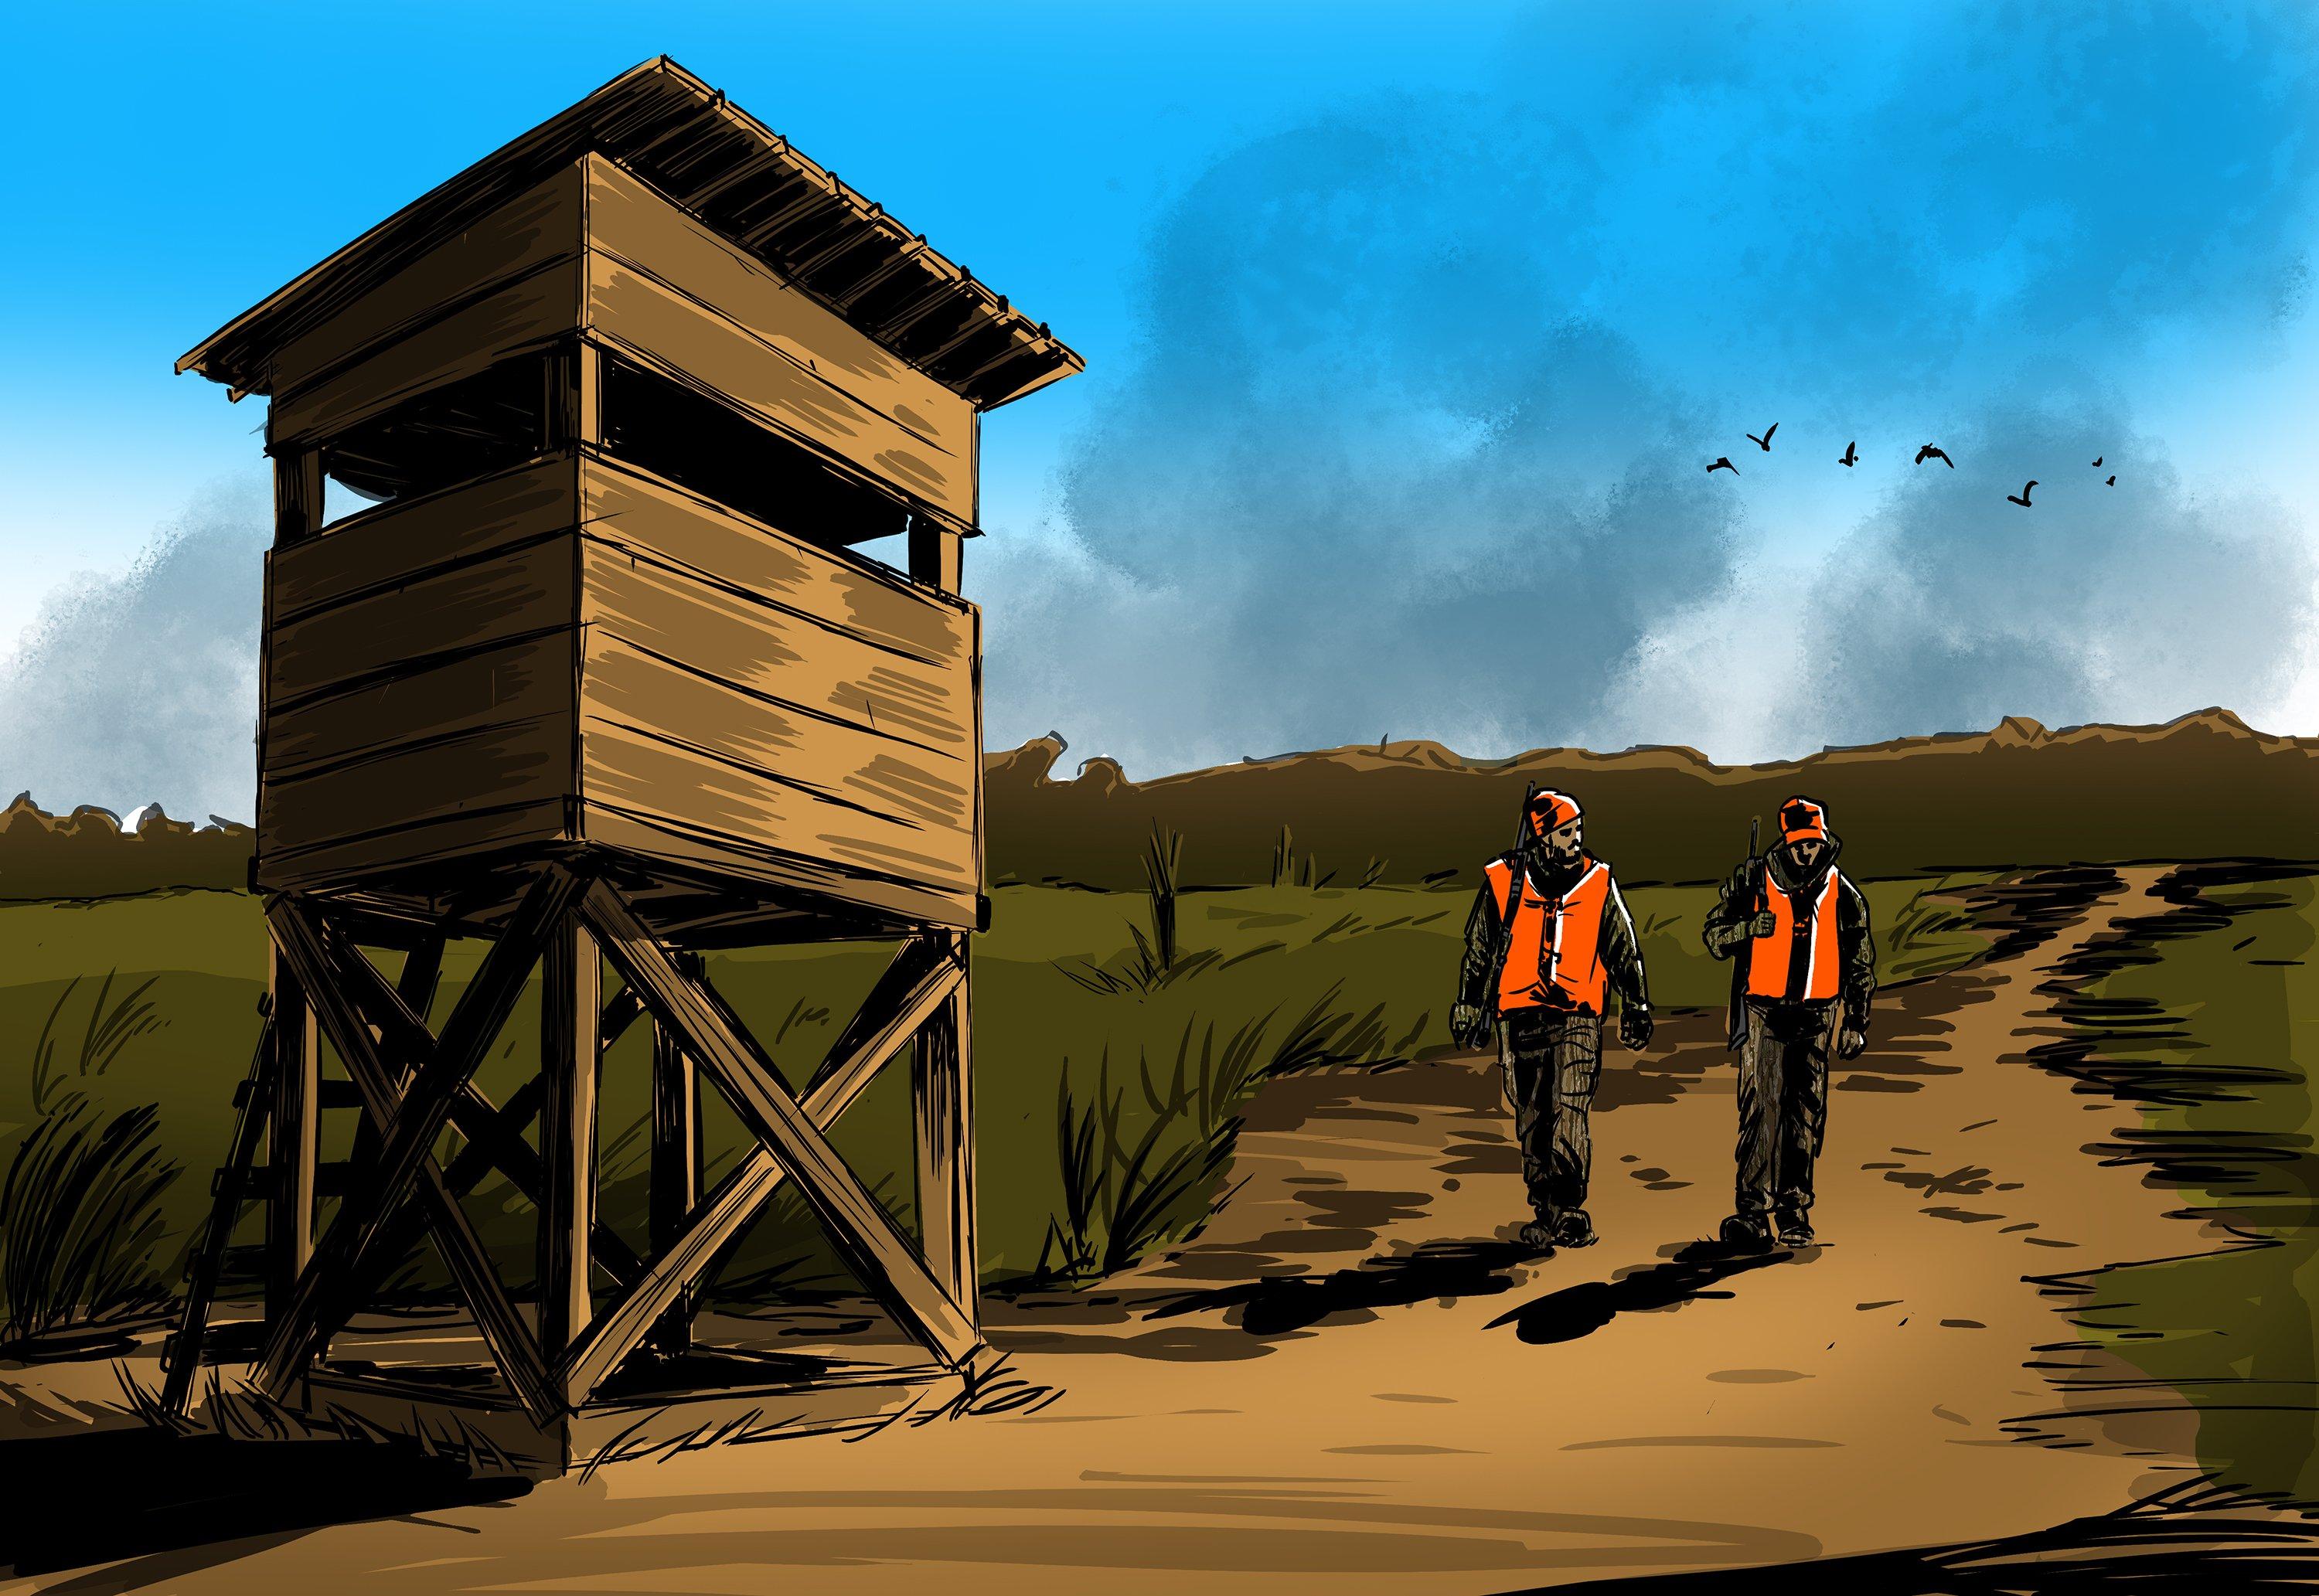 A shooting house keeps you hidden and comfortable for those long sits during gun season. Illustration by Ryan Orndorff